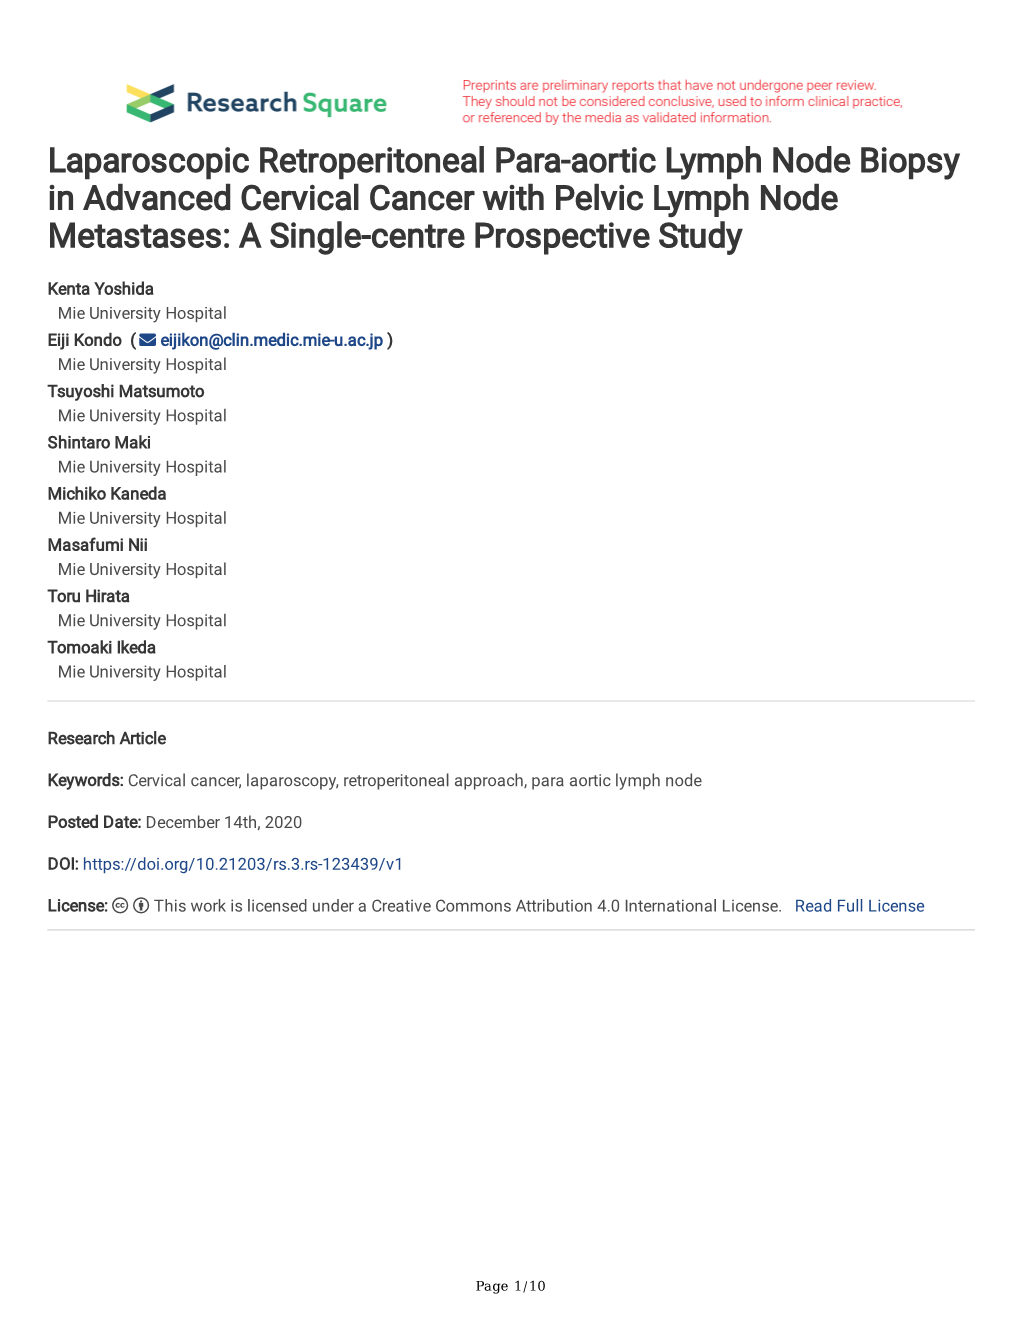 Laparoscopic Retroperitoneal Para-Aortic Lymph Node Biopsy in Advanced Cervical Cancer with Pelvic Lymph Node Metastases: a Single-Centre Prospective Study